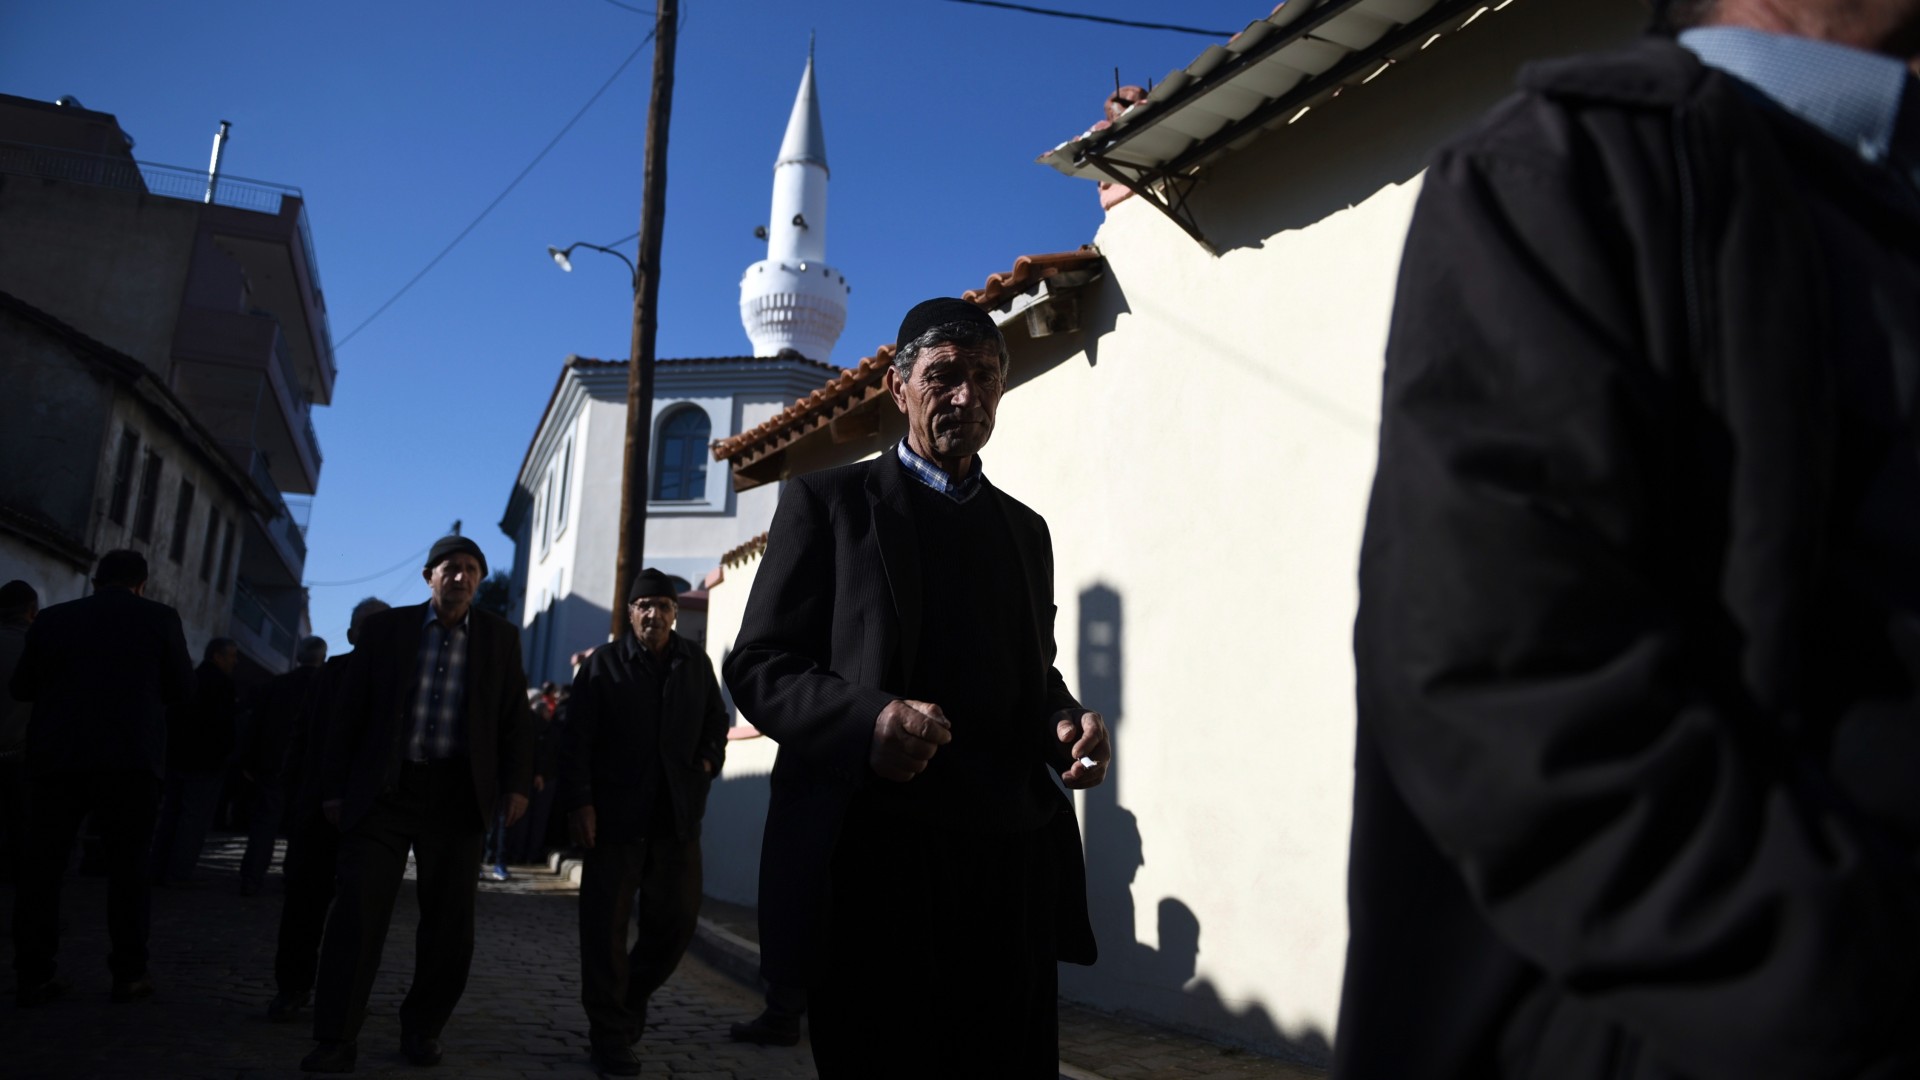 Pilgrims wait to enter at Kirmahalle Cammi mosque in the northeastern Greek town of Komotini, in 2017 (AP)